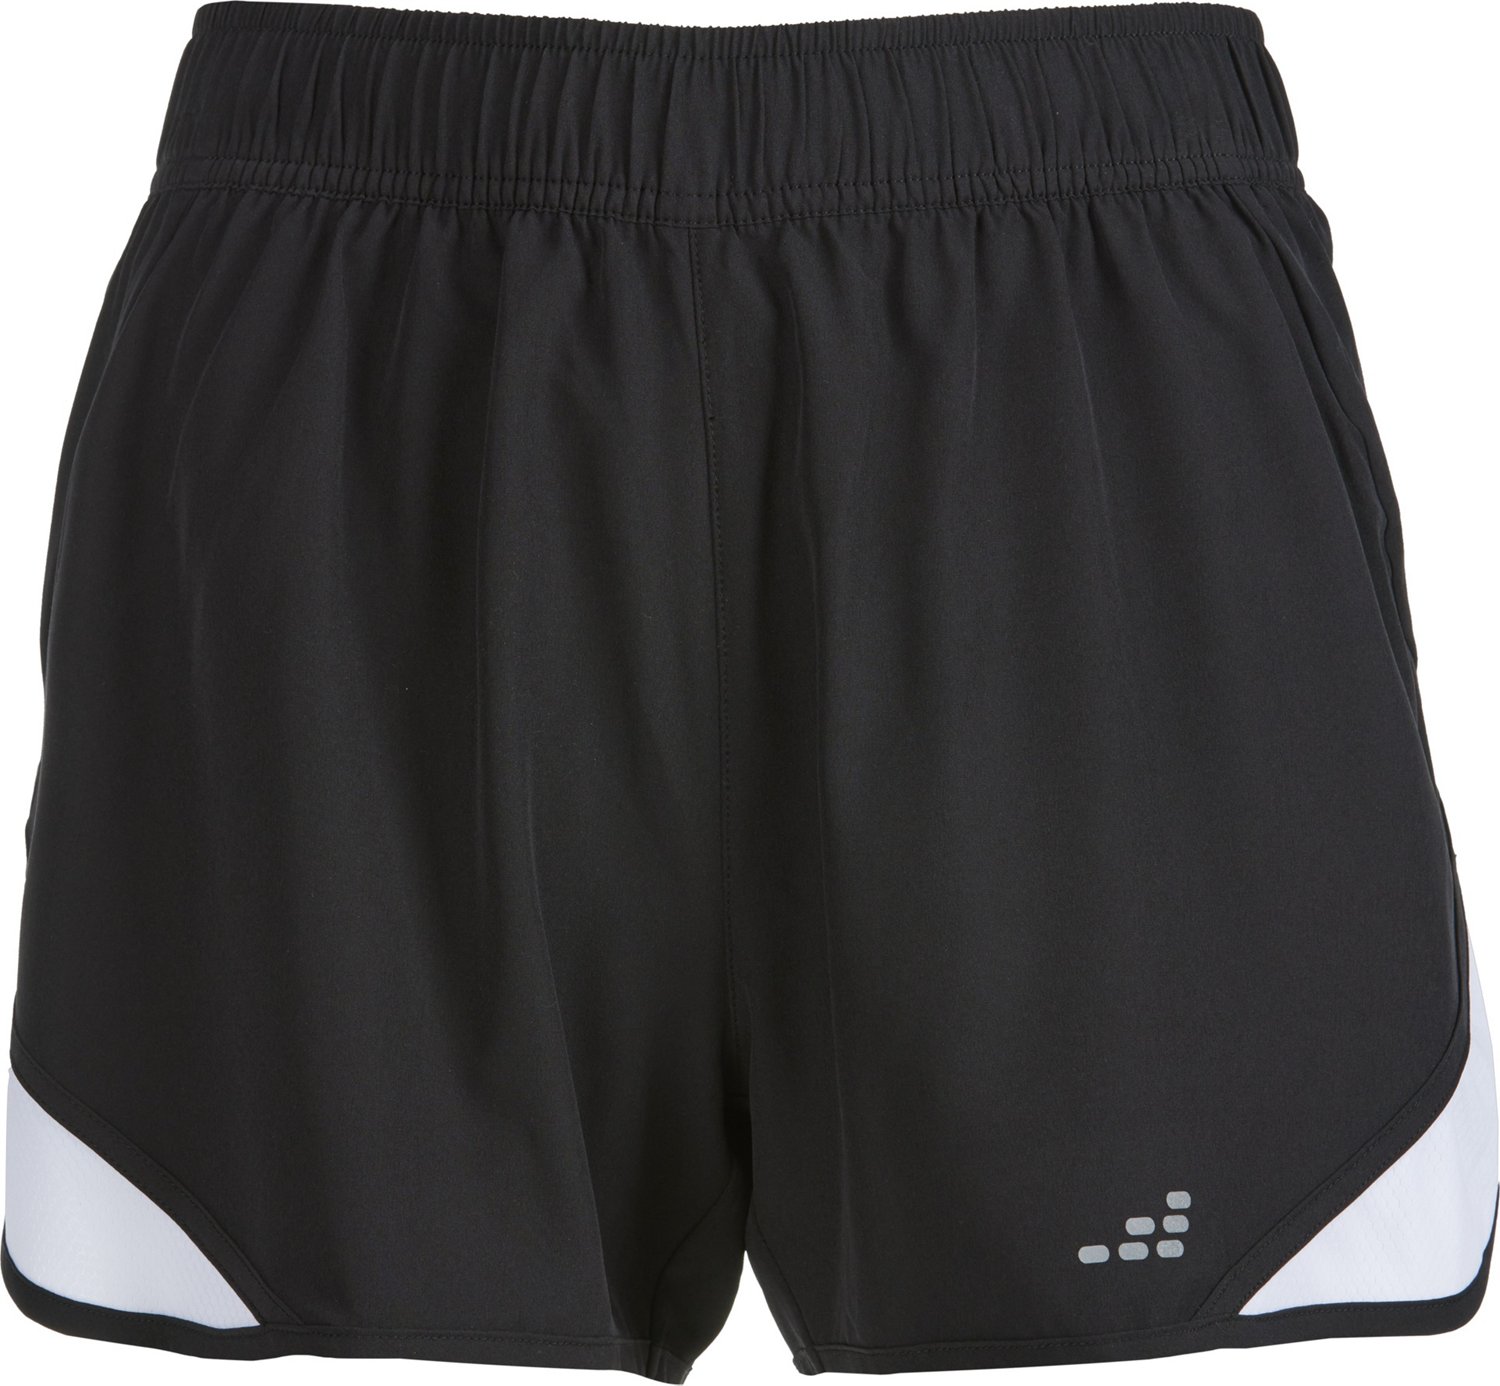 BCG Women's Run Mesh Pieced Shorts                                                                                               - view number 1 selected